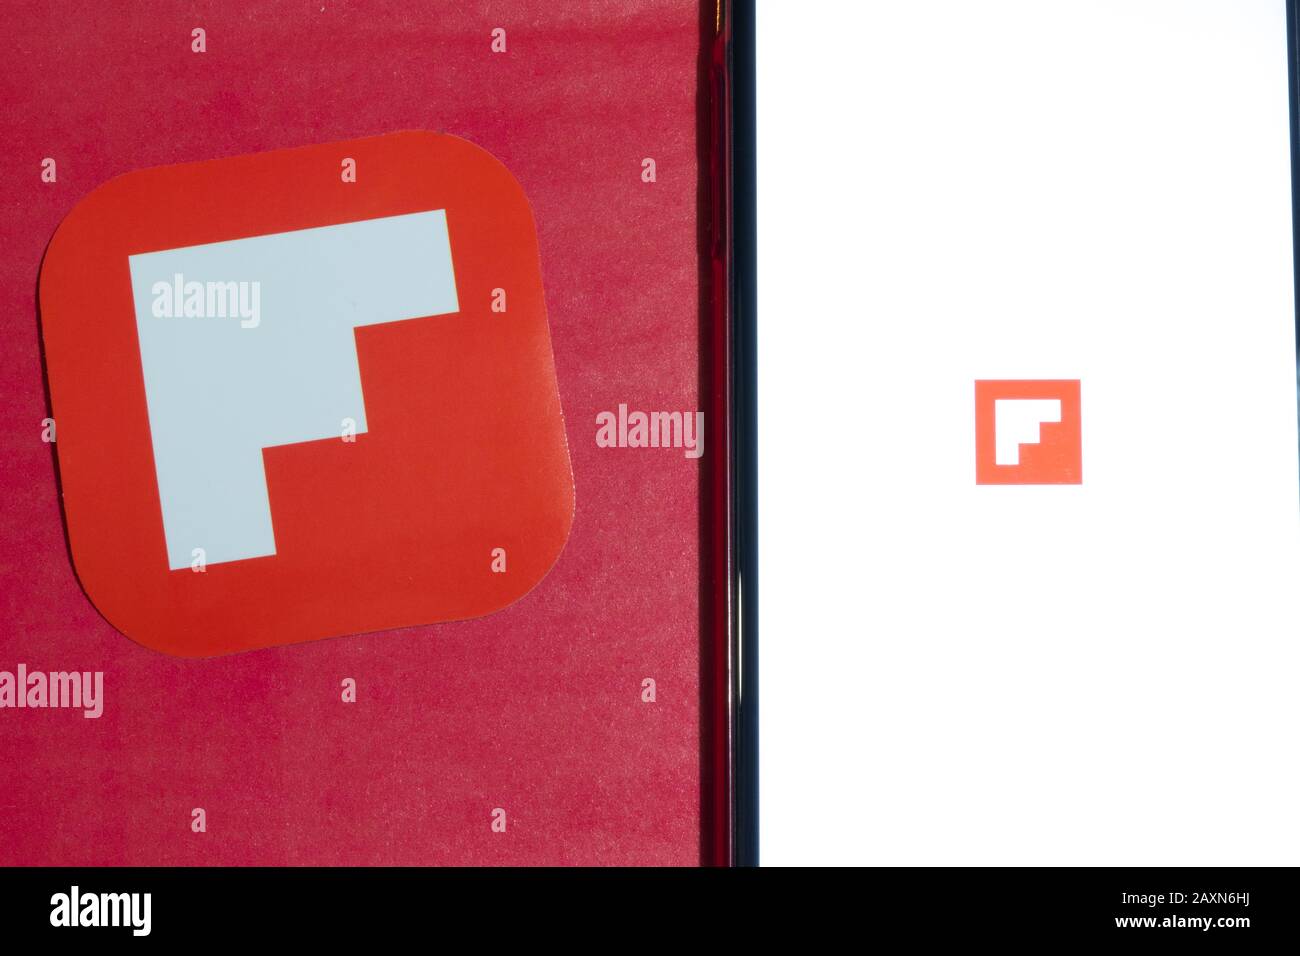 Los Angeles, California, USA - 12 February 2020: Flipboard app logo and phone with icon close up , Illustrative Editorial Stock Photo